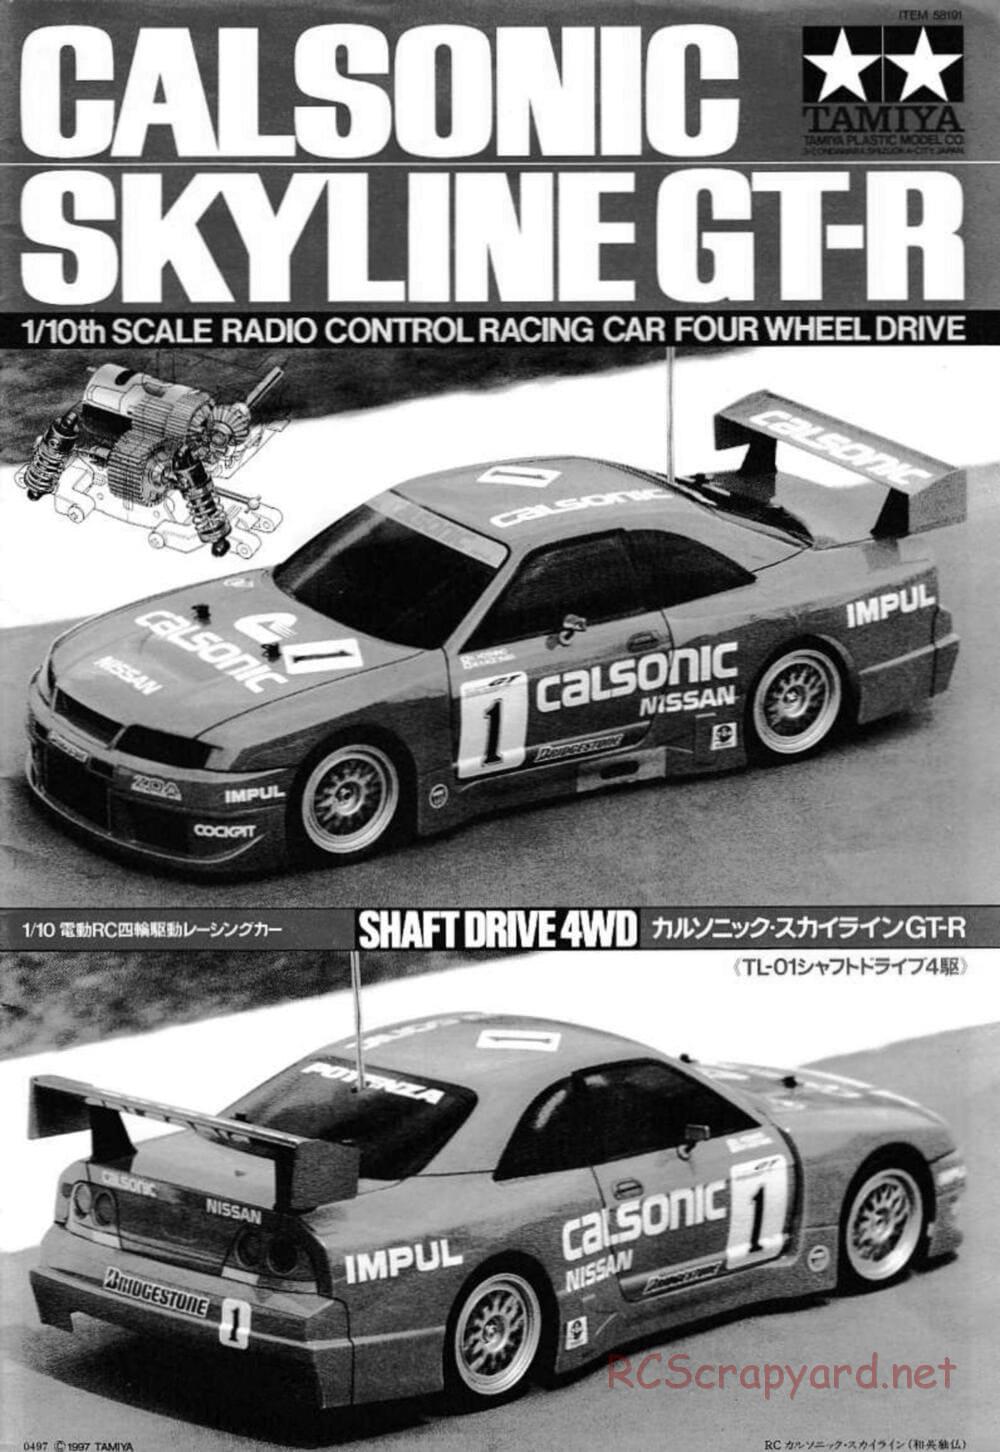 Tamiya - Calsonic Skyline GT-R - TL-01 Chassis - Manual - Page 1